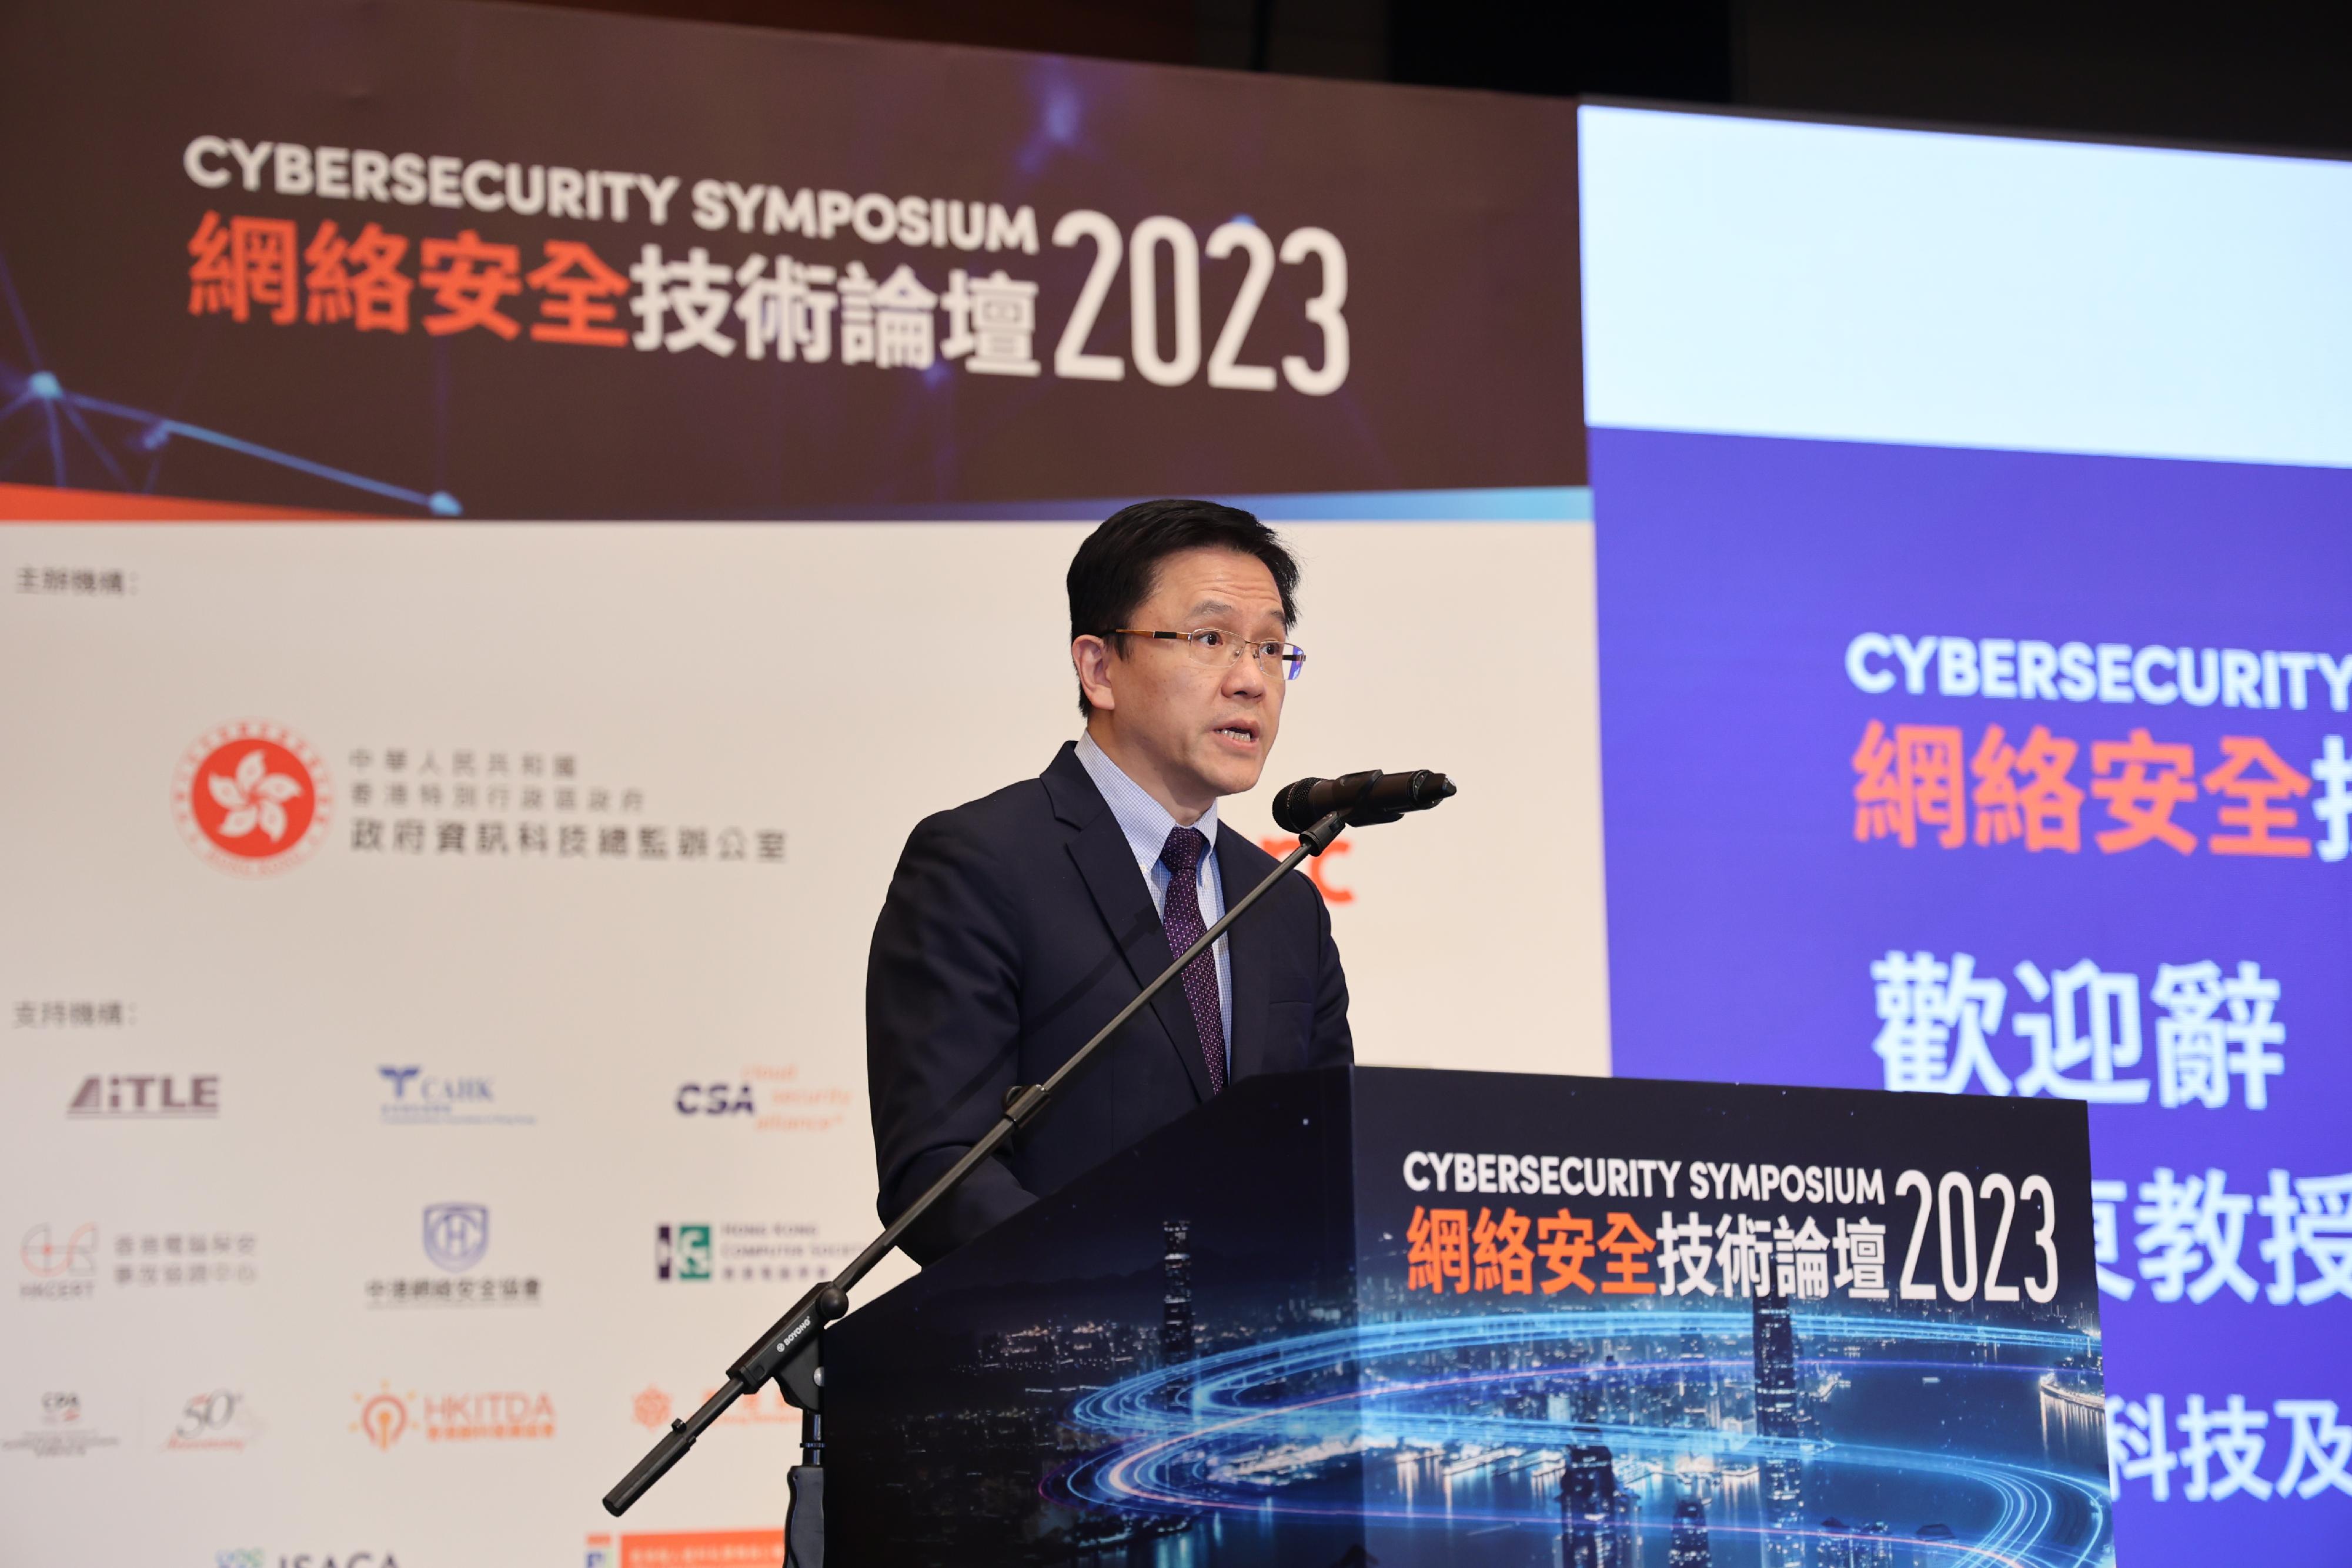 The Secretary for Innovation, Technology and Industry, Professor Sun Dong, addresses the Cybersecurity Symposium 2023 today (December 14).